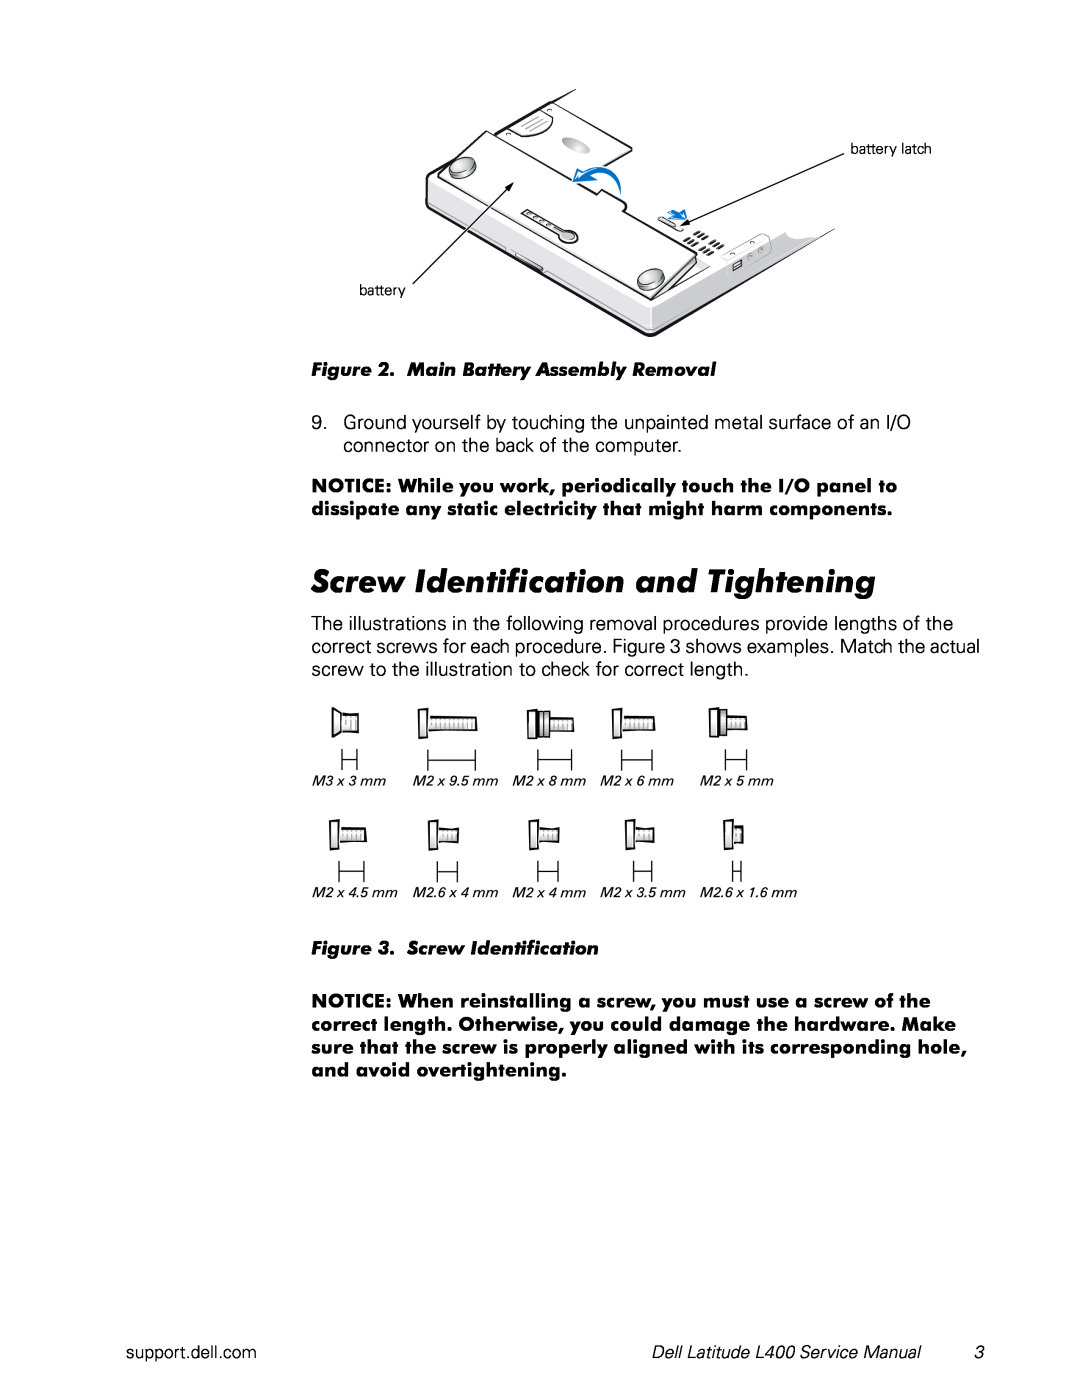 Dell L400 service manual Screw Identification and Tightening, Main Battery Assembly Removal 